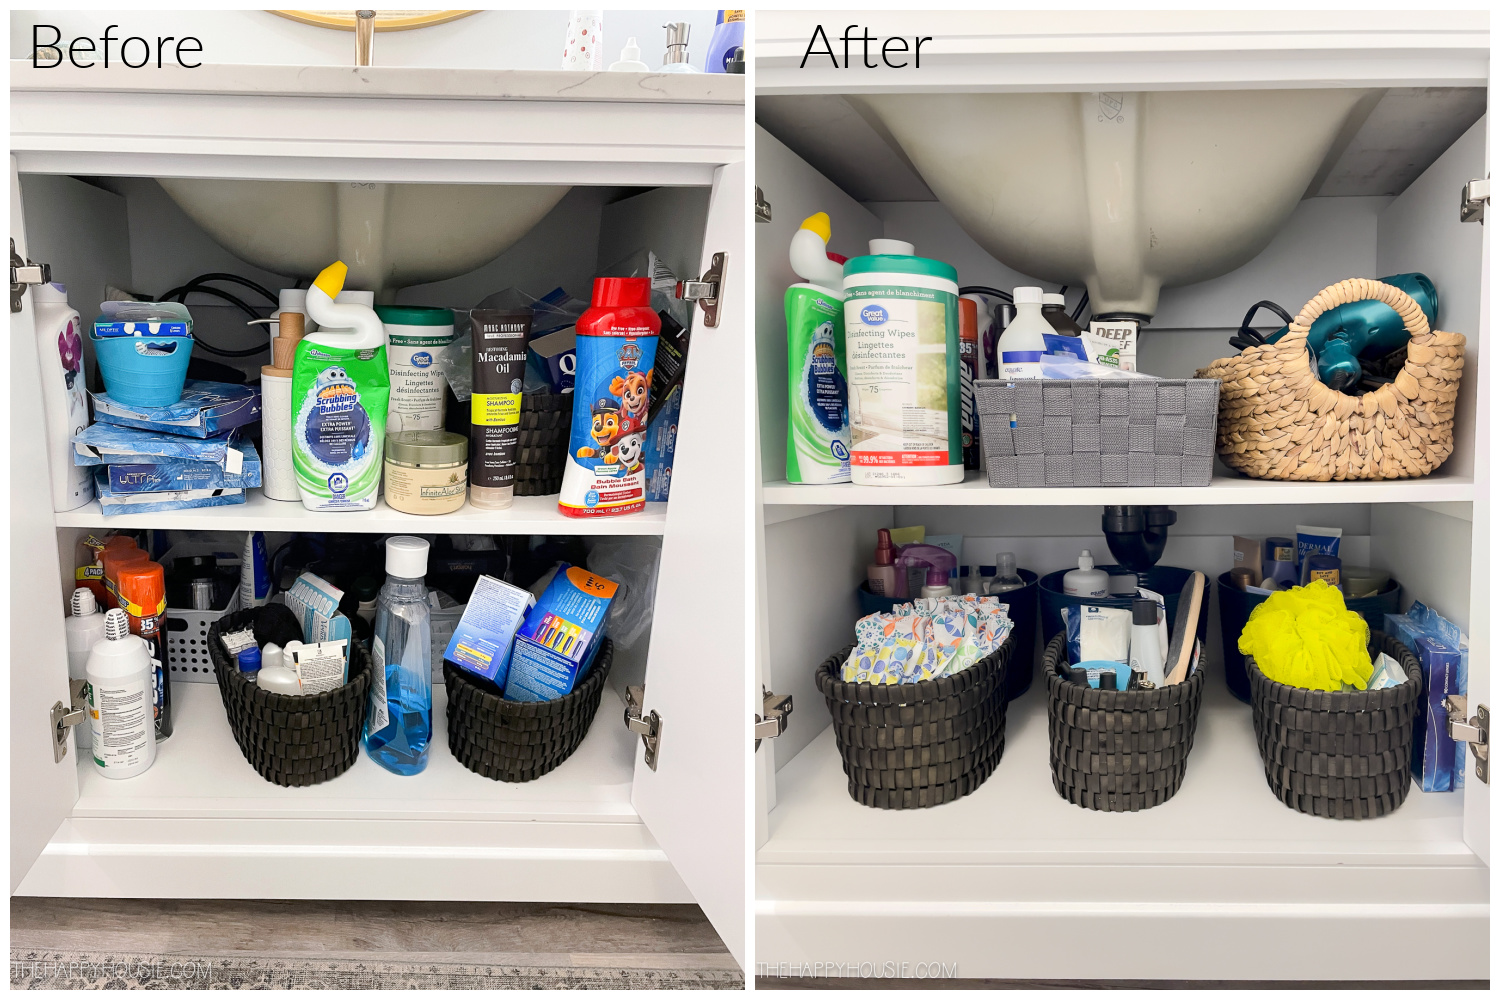 Organizing Bathroom Drawers and Cupboards - Tidbits